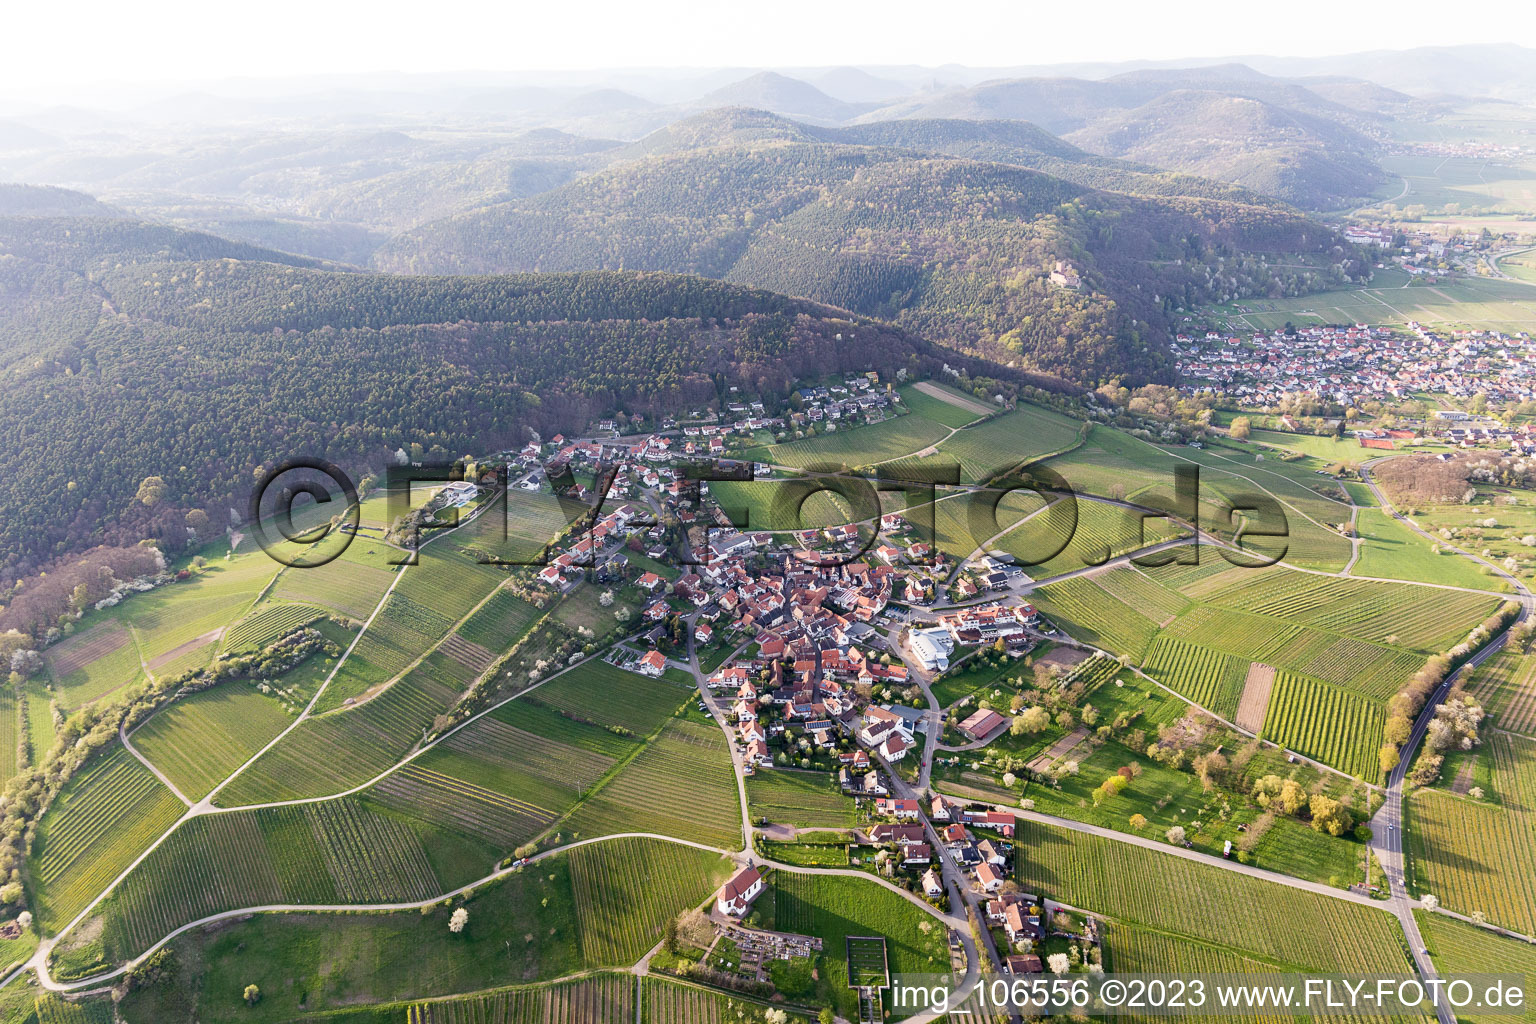 District Gleiszellen in Gleiszellen-Gleishorbach in the state Rhineland-Palatinate, Germany seen from a drone